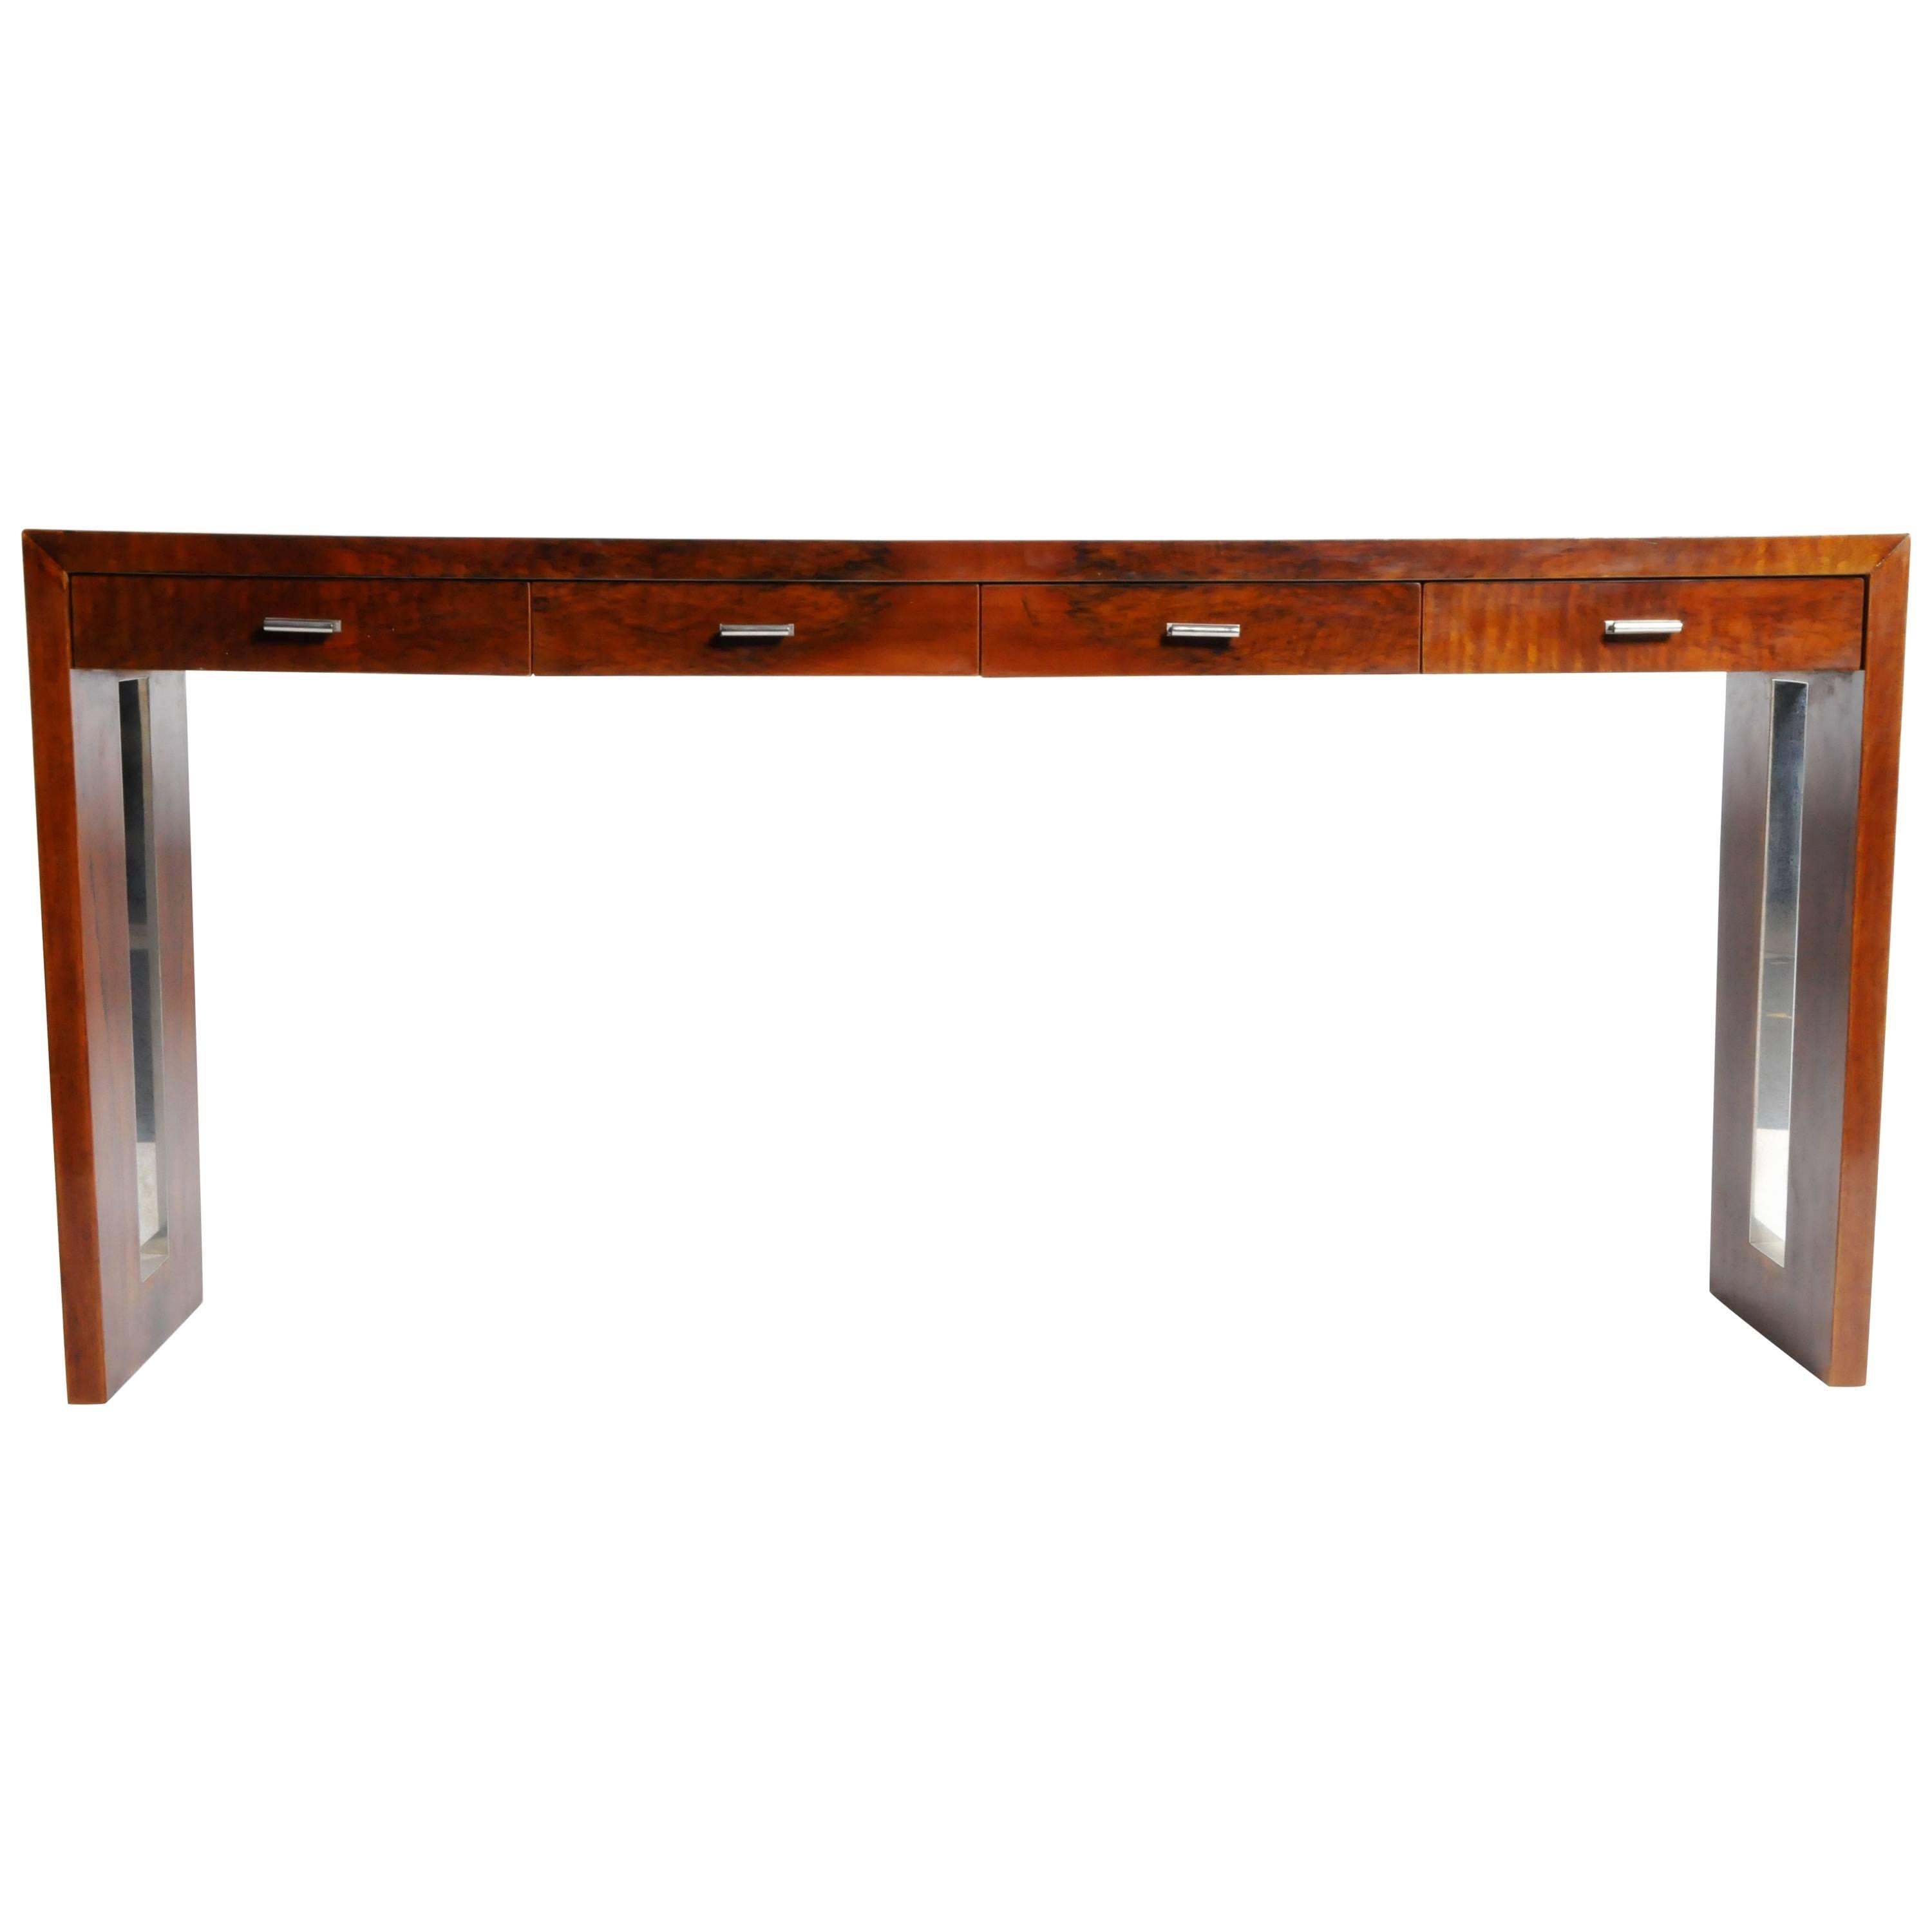 Four-Drawer Console Table with Metal Inlay